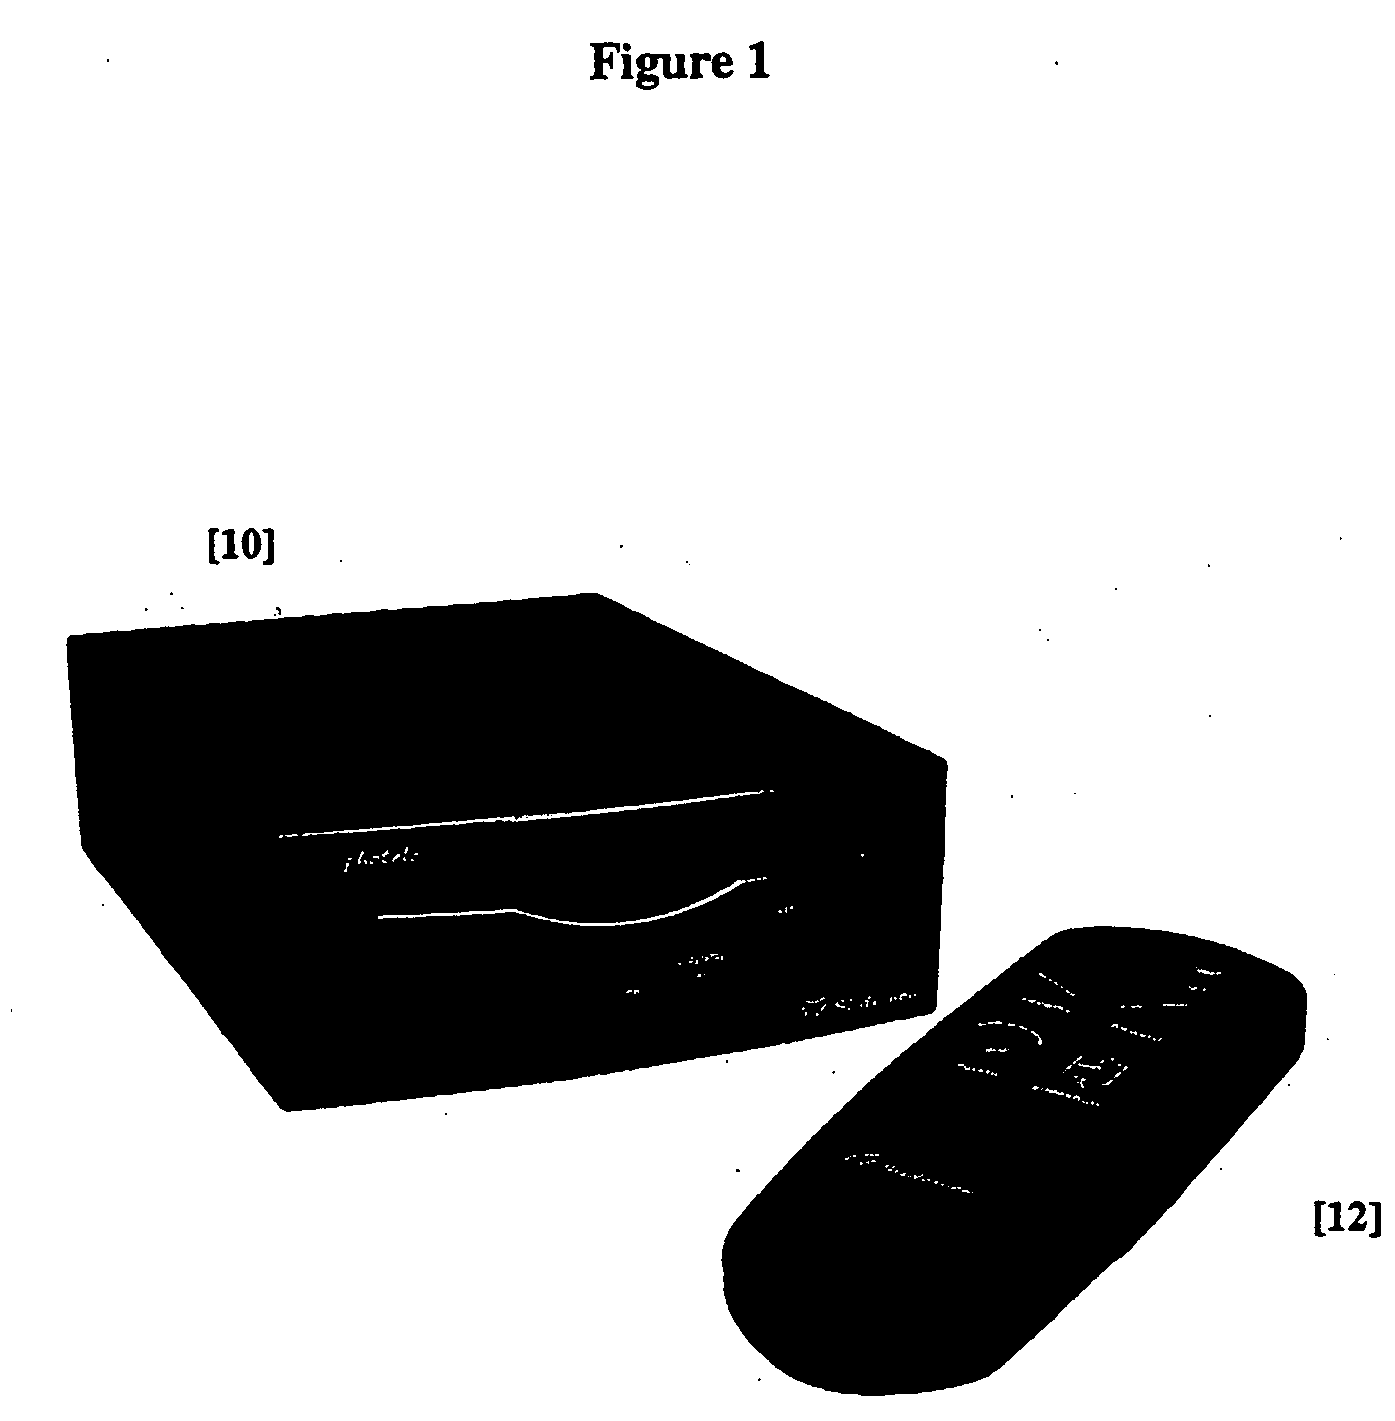 Method and apparatus for the display of still images from image files